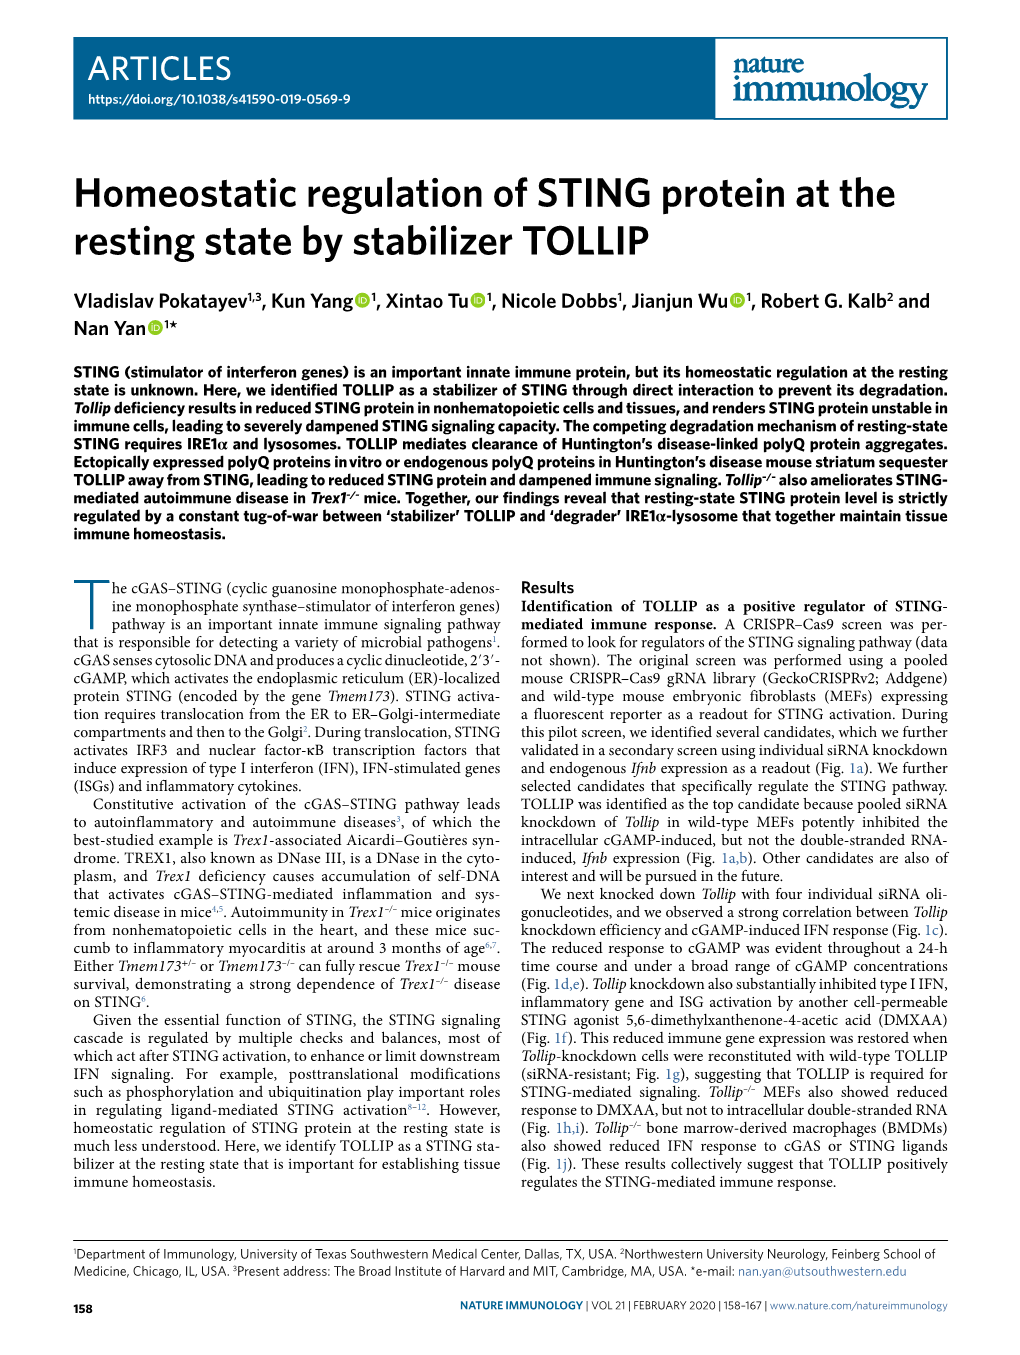 Homeostatic Regulation of STING Protein at the Resting State by Stabilizer TOLLIP